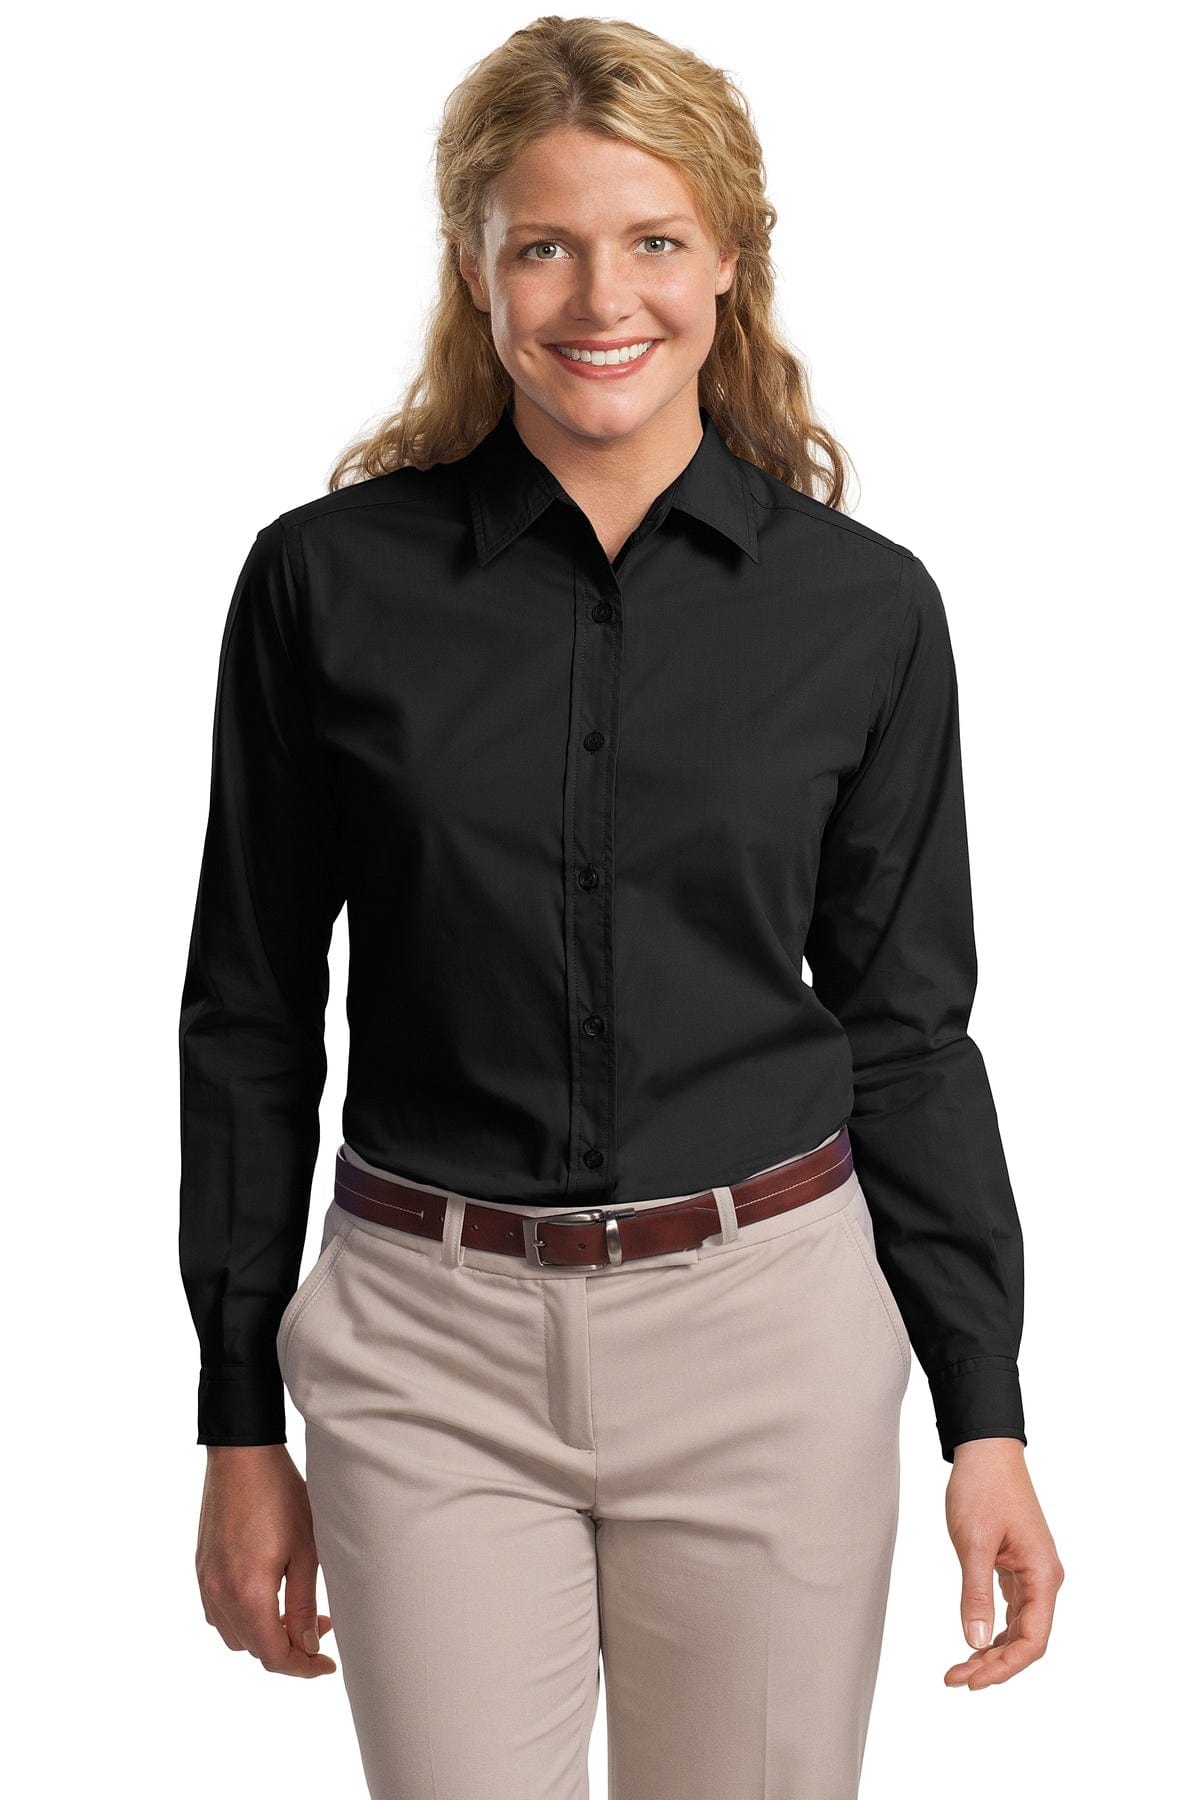 DISCONTINUED  Port Authority ®  Ladies Long Sleeve Easy Care, Soil Resistant Shirt.  L607